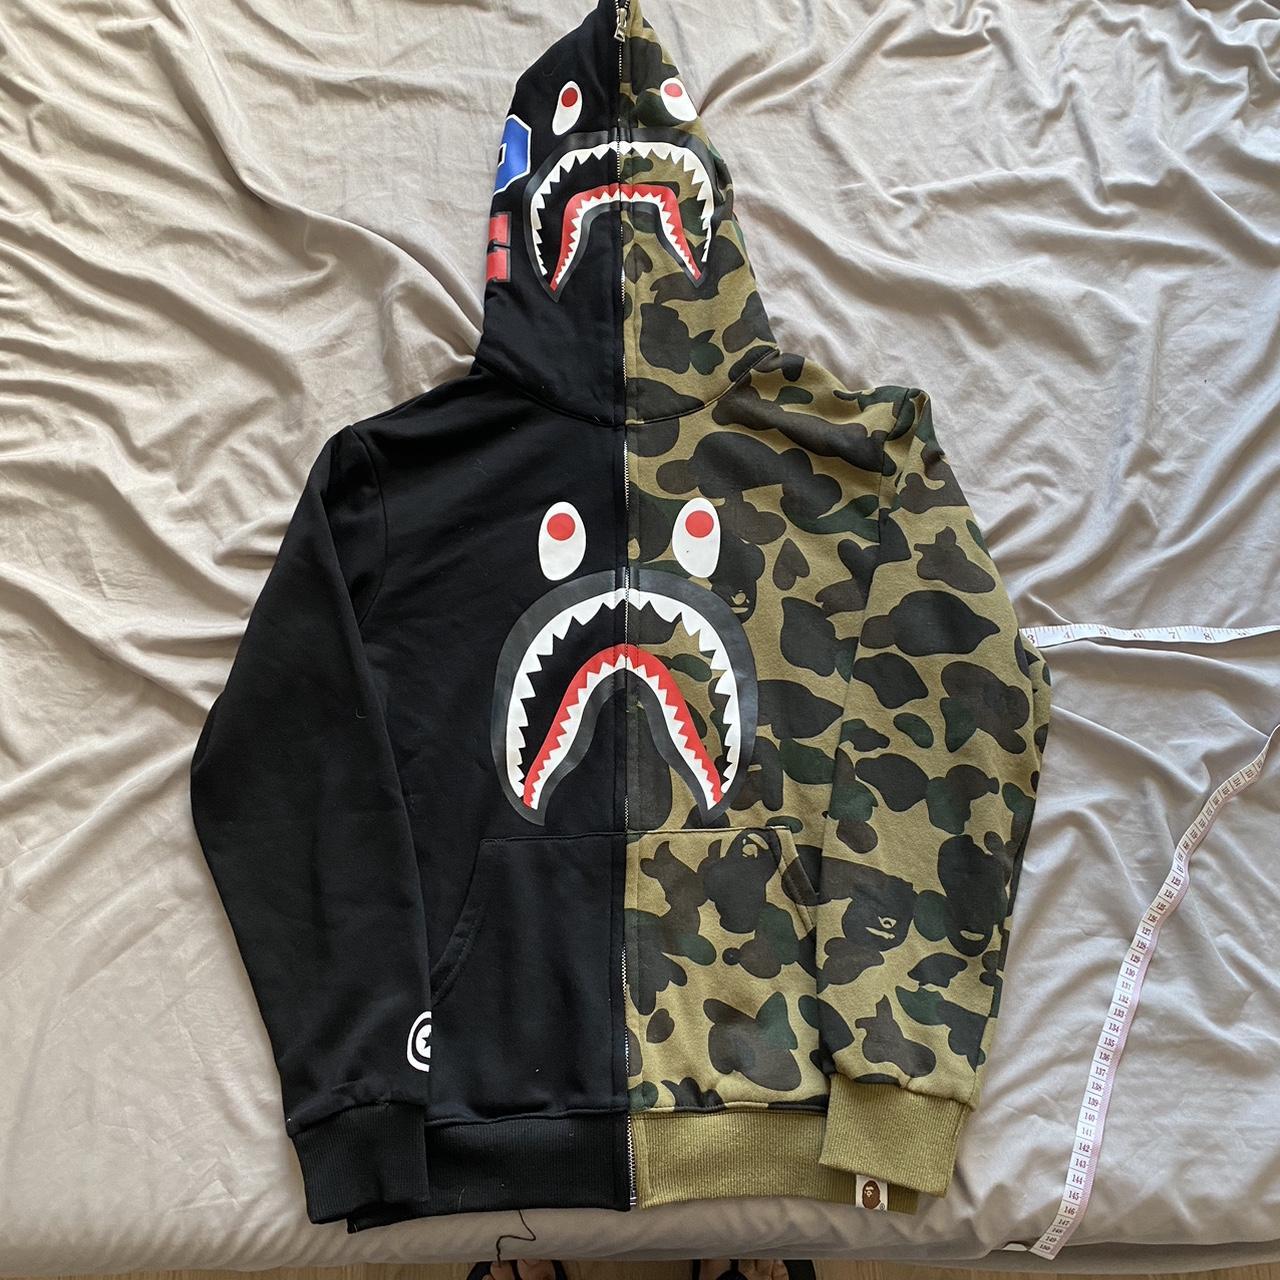 Bape Hoodie I do not have proof of purchase, this... - Depop